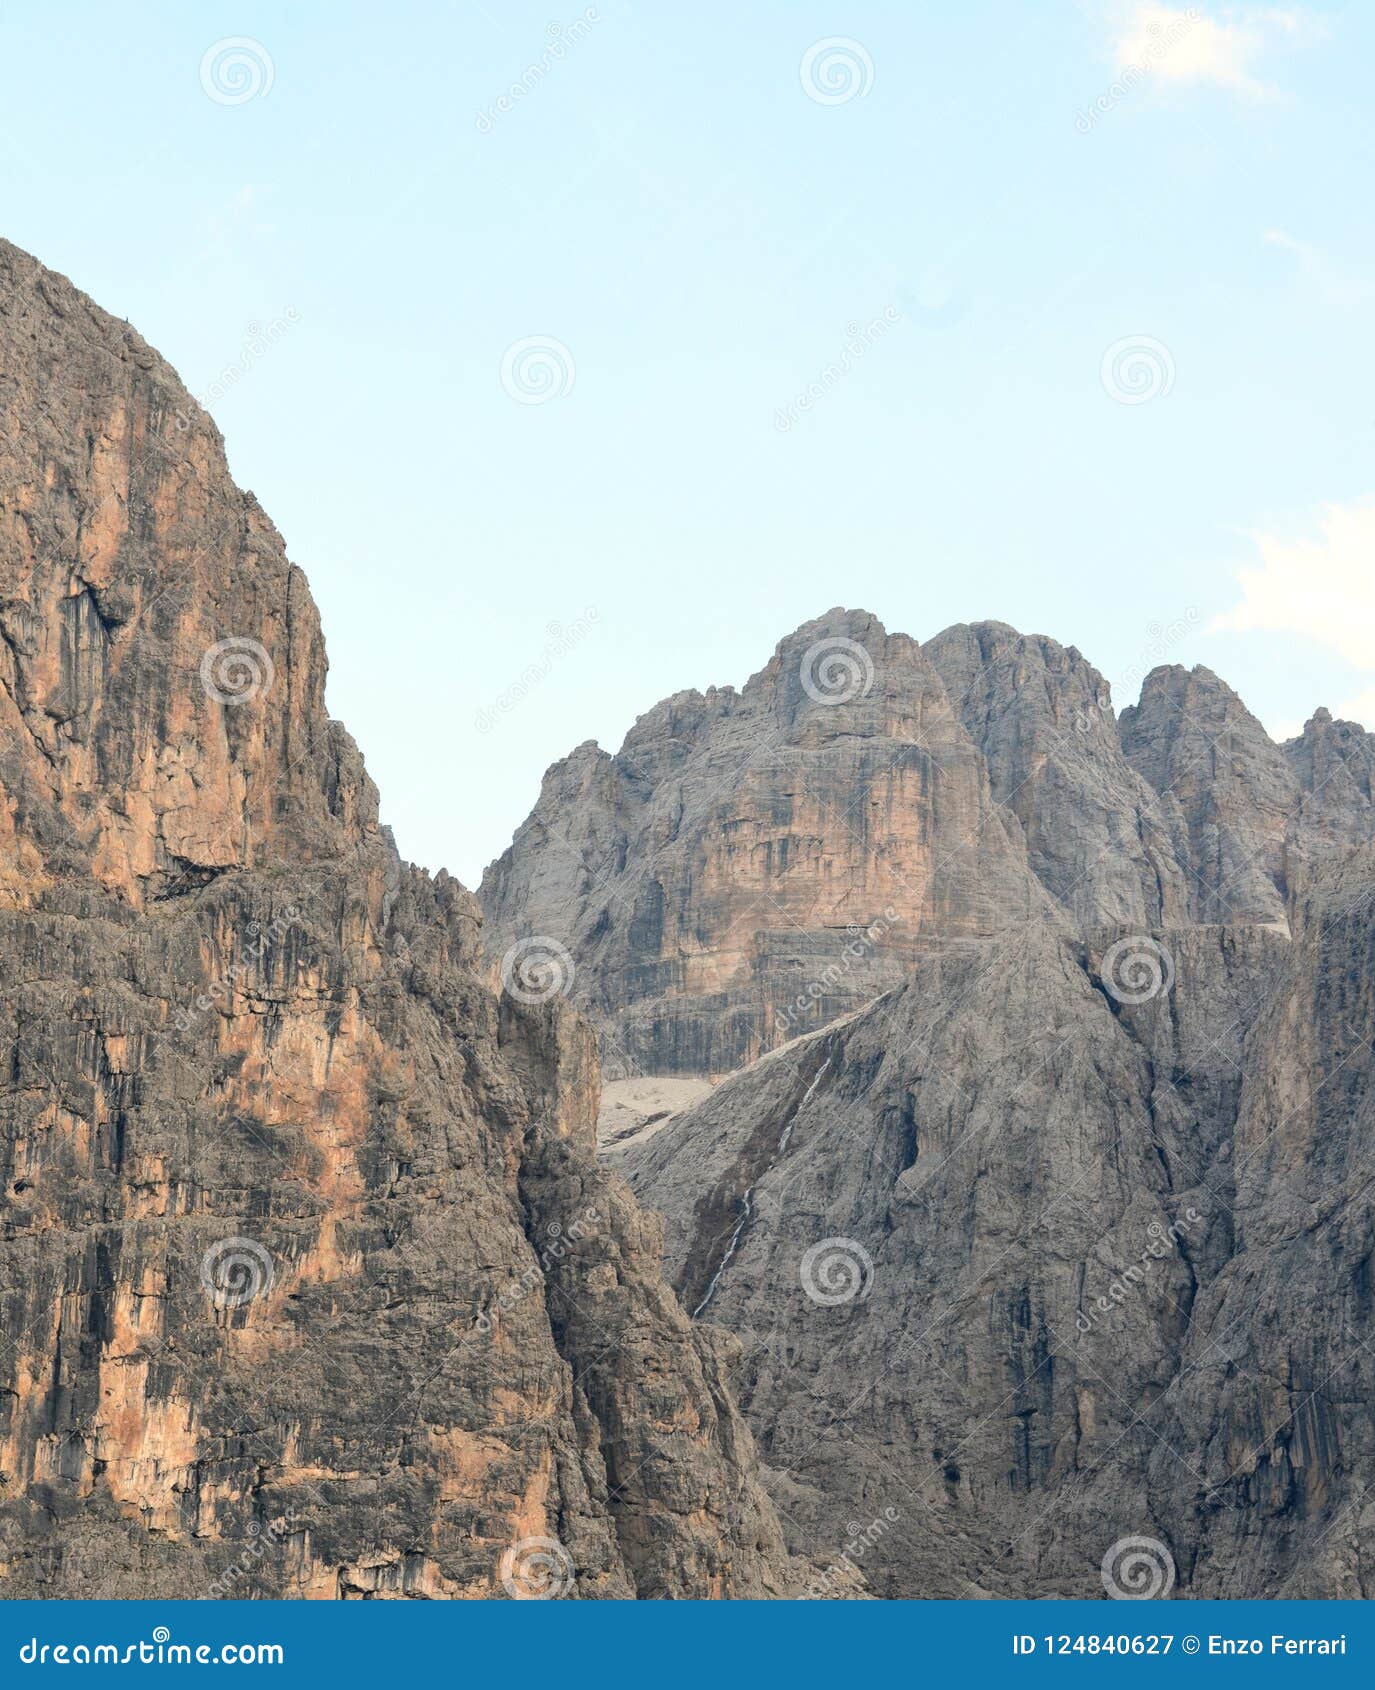 view of the dolomites protected by unesco